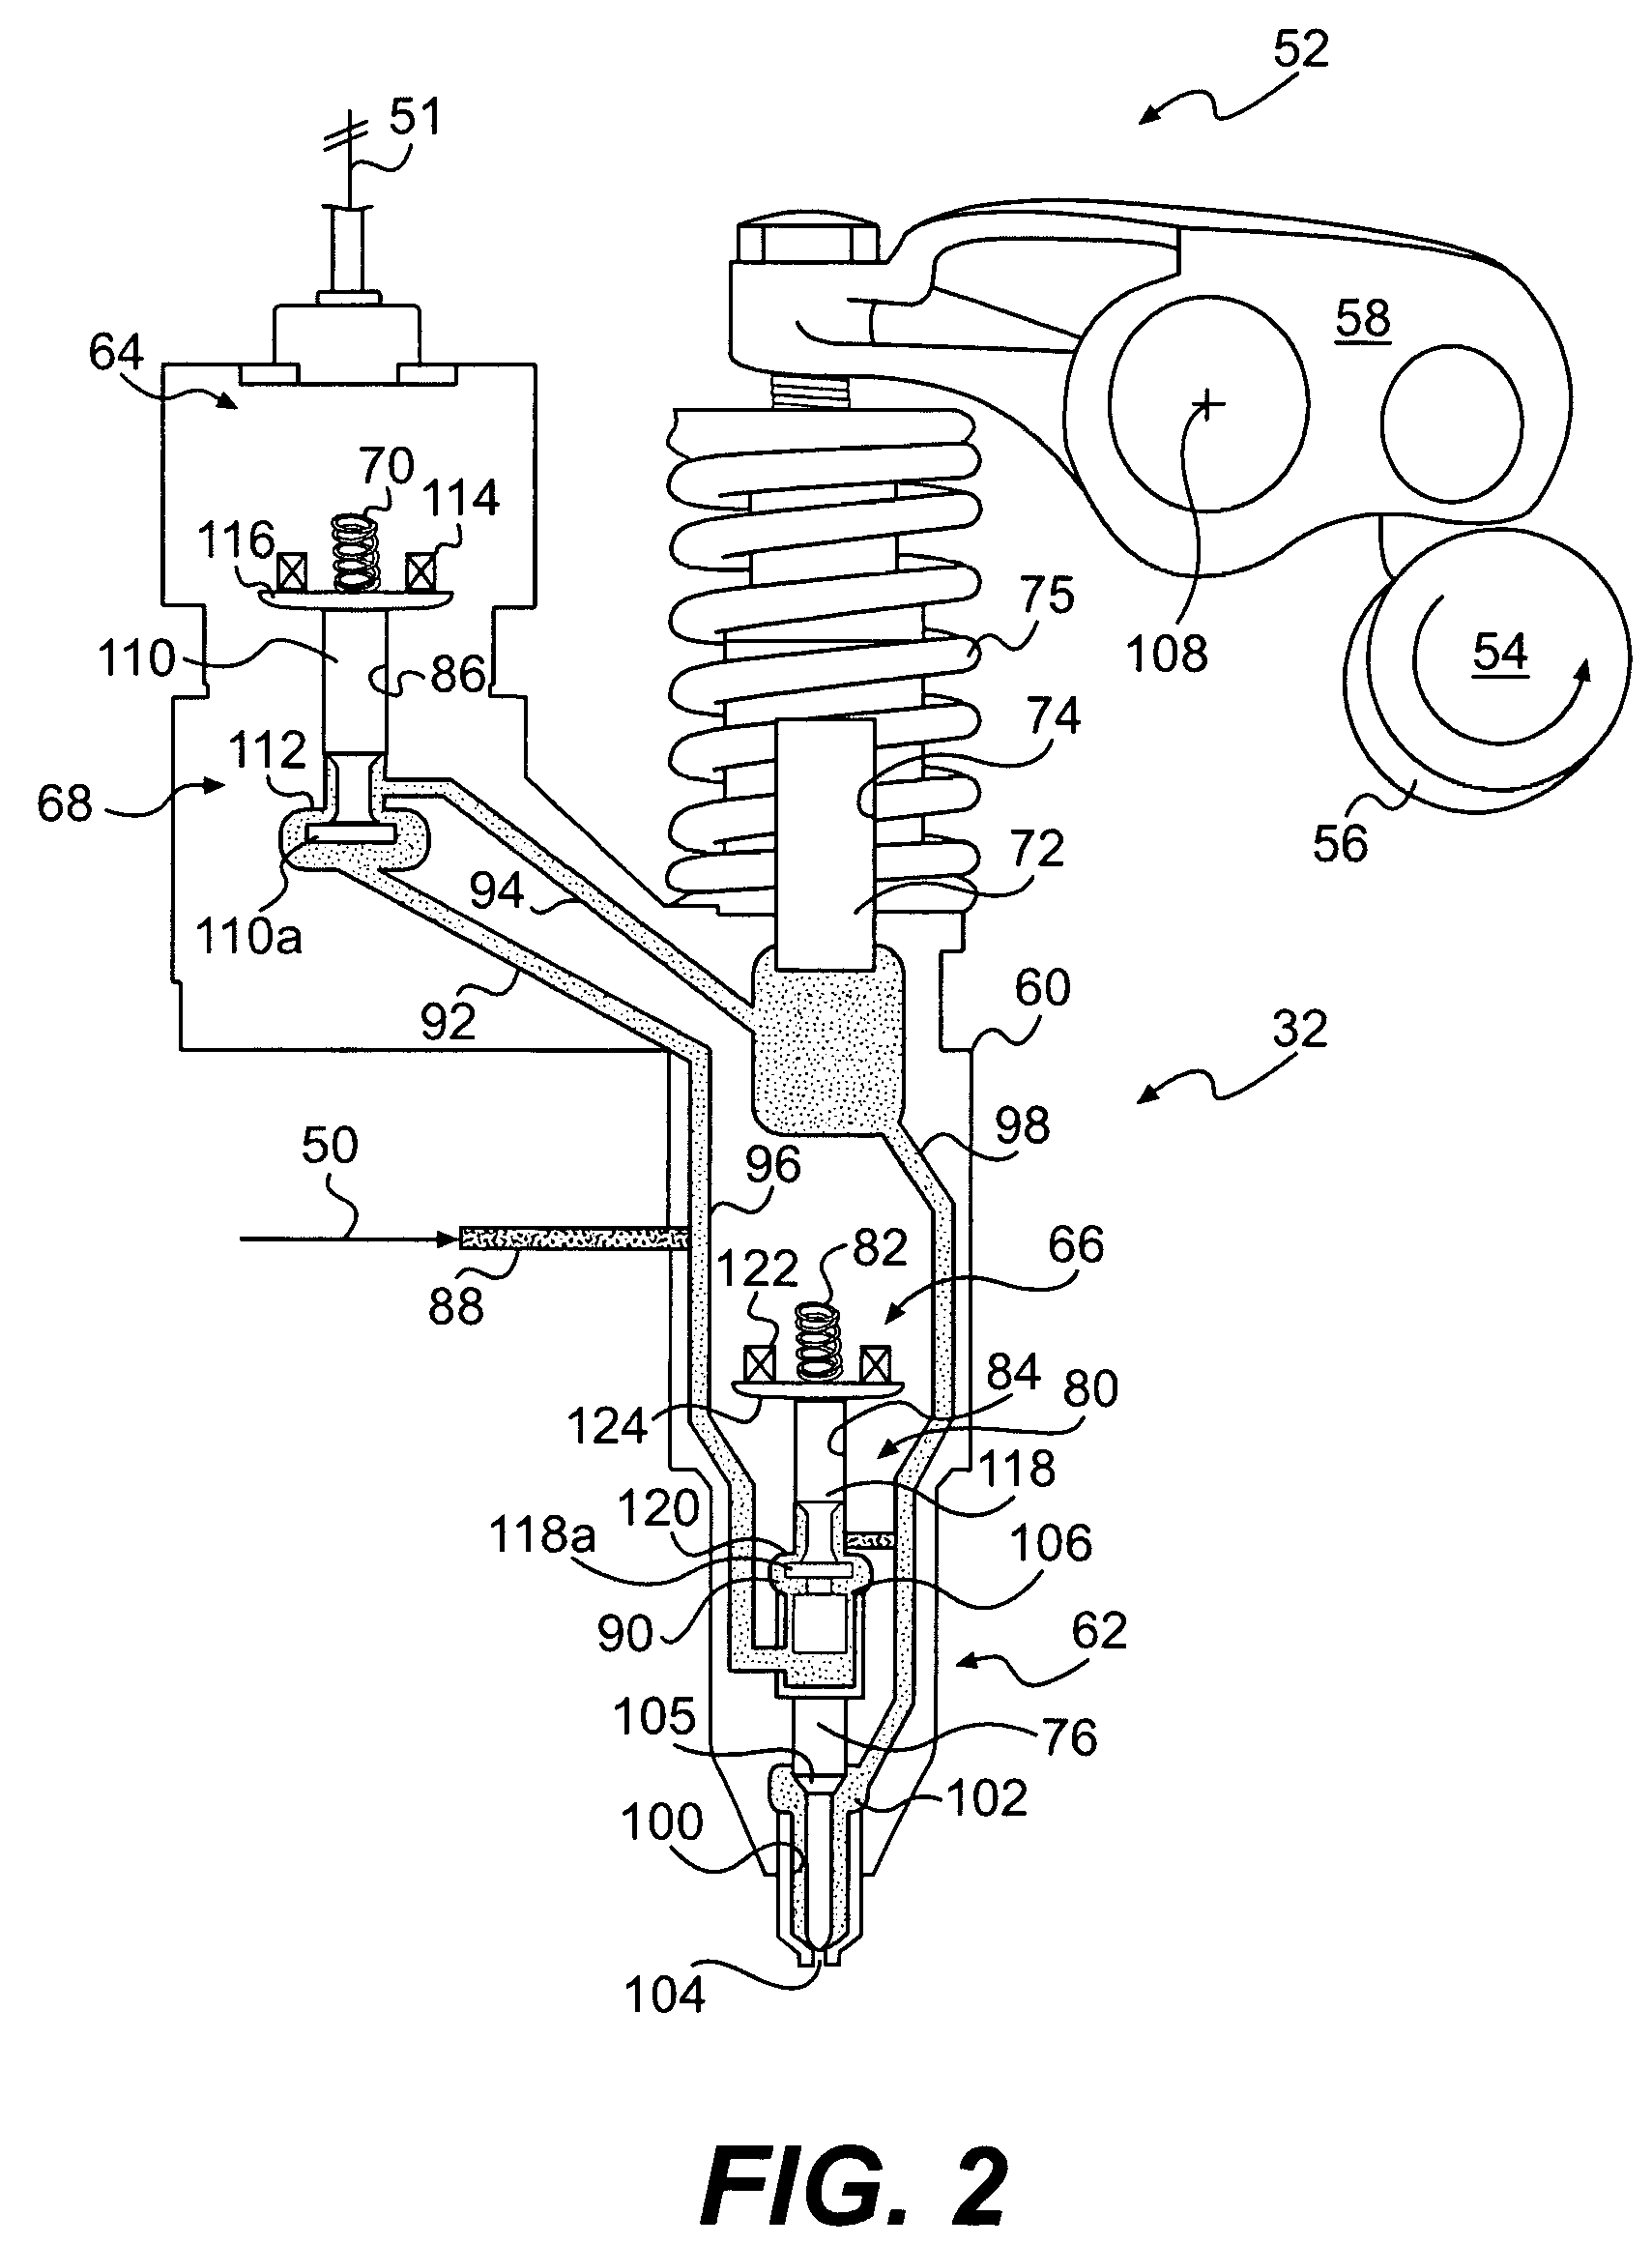 Parasitic load control system for exhaust temperature control